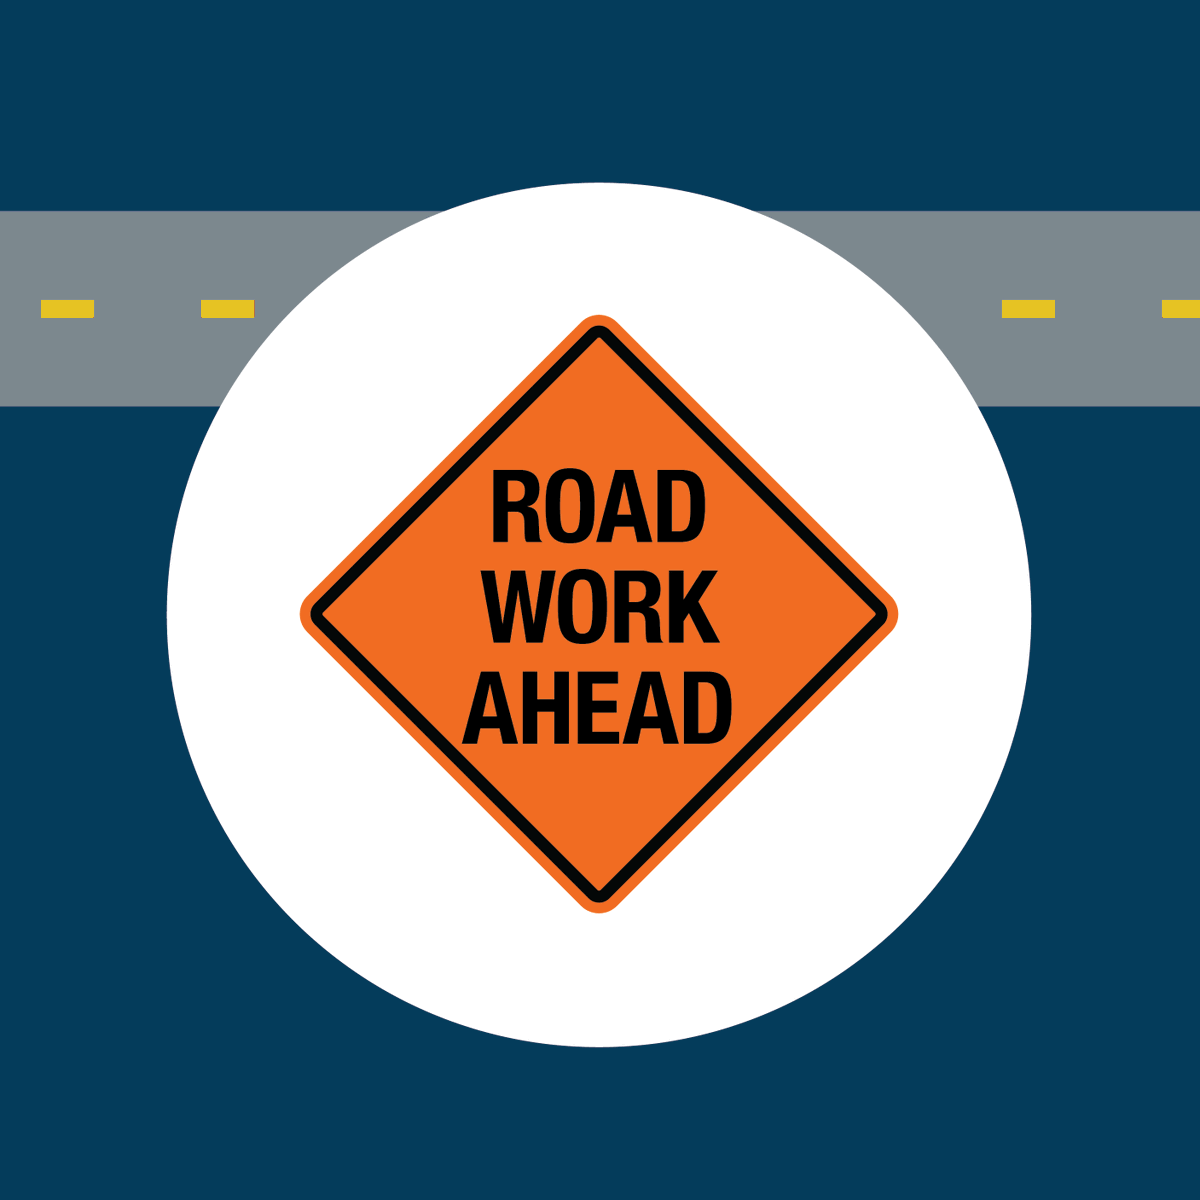 Warning signs, slow signs and road work signs are only a few of the signs you might see when you enter a work zone. ✔️Check your speed ✔️Be careful around large vehicles ✔️READ THE SIGNS Remember: Work zones are a sign to slow down. #NWZAW #Orange4Safety